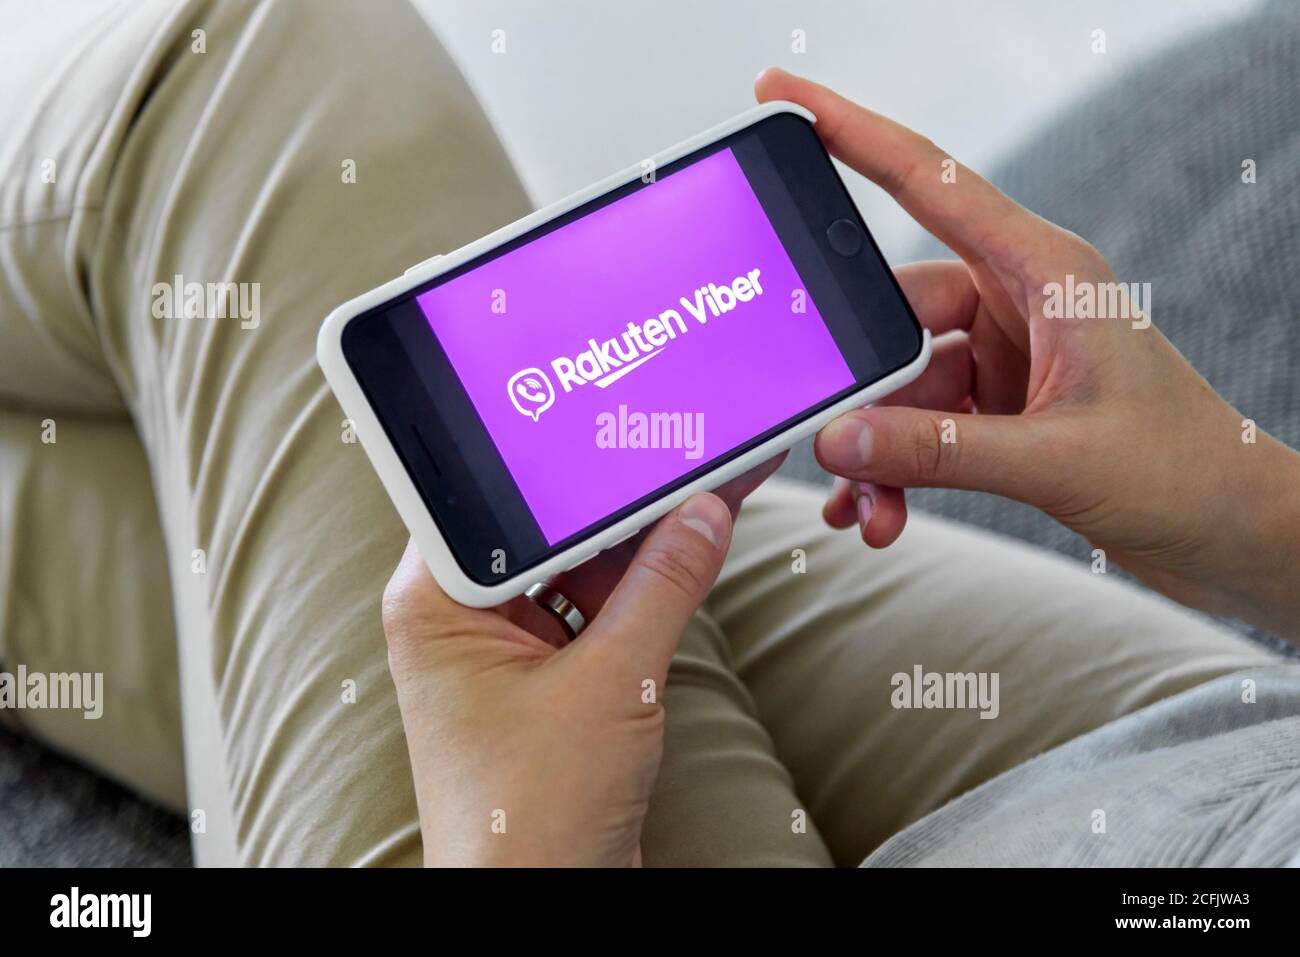 Woman holding a iPhone 7 with client messaging and voice service Viber on the screen. Stock Photo